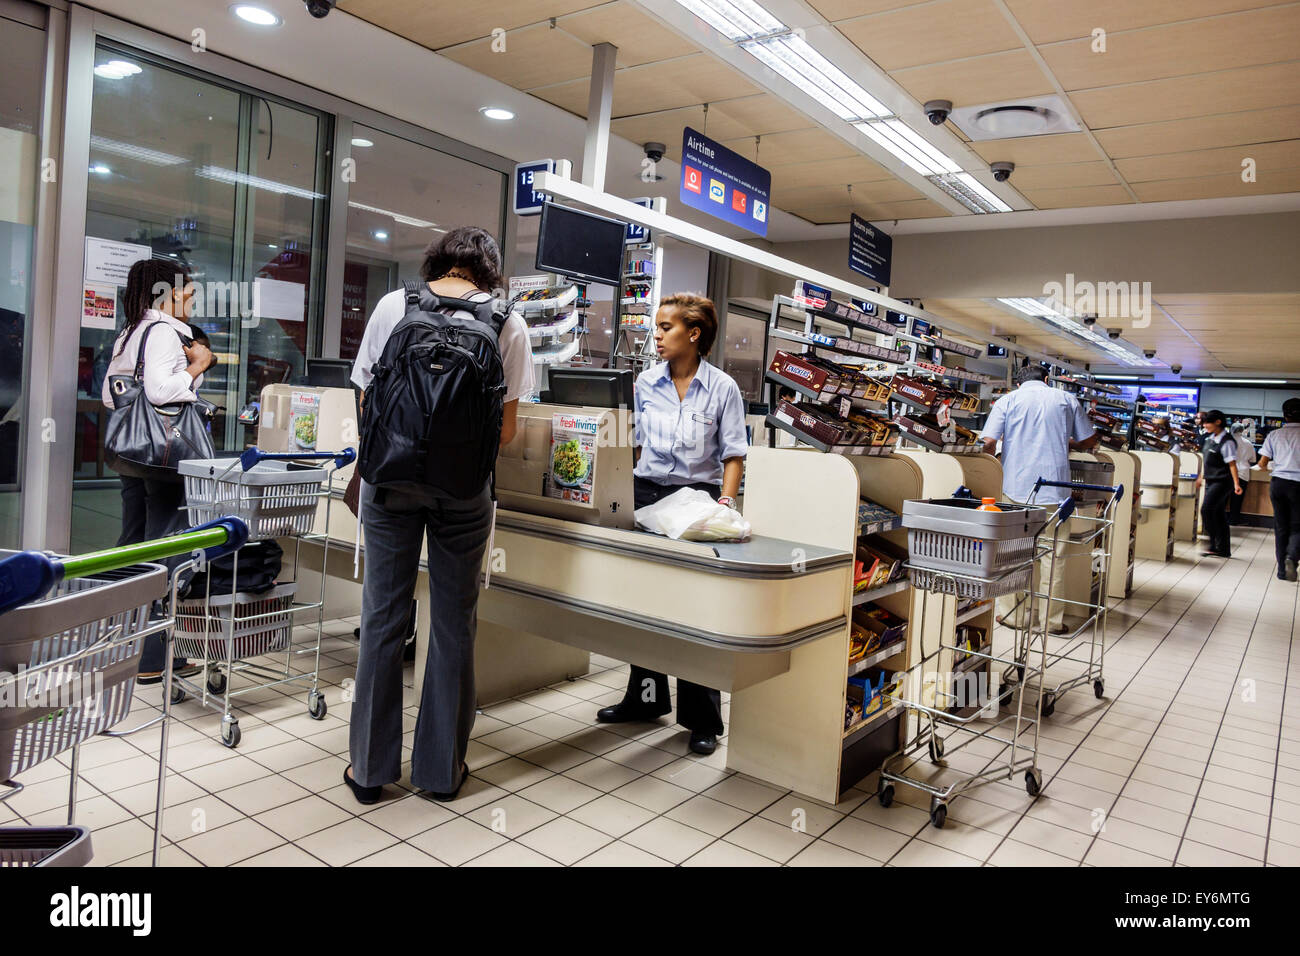 Cape Town South Africa,City Centre,center,Pick n Pay,grocery store,supermarket,interior inside,food,sale,checkout,cashier,SAfri150309199 Stock Photo